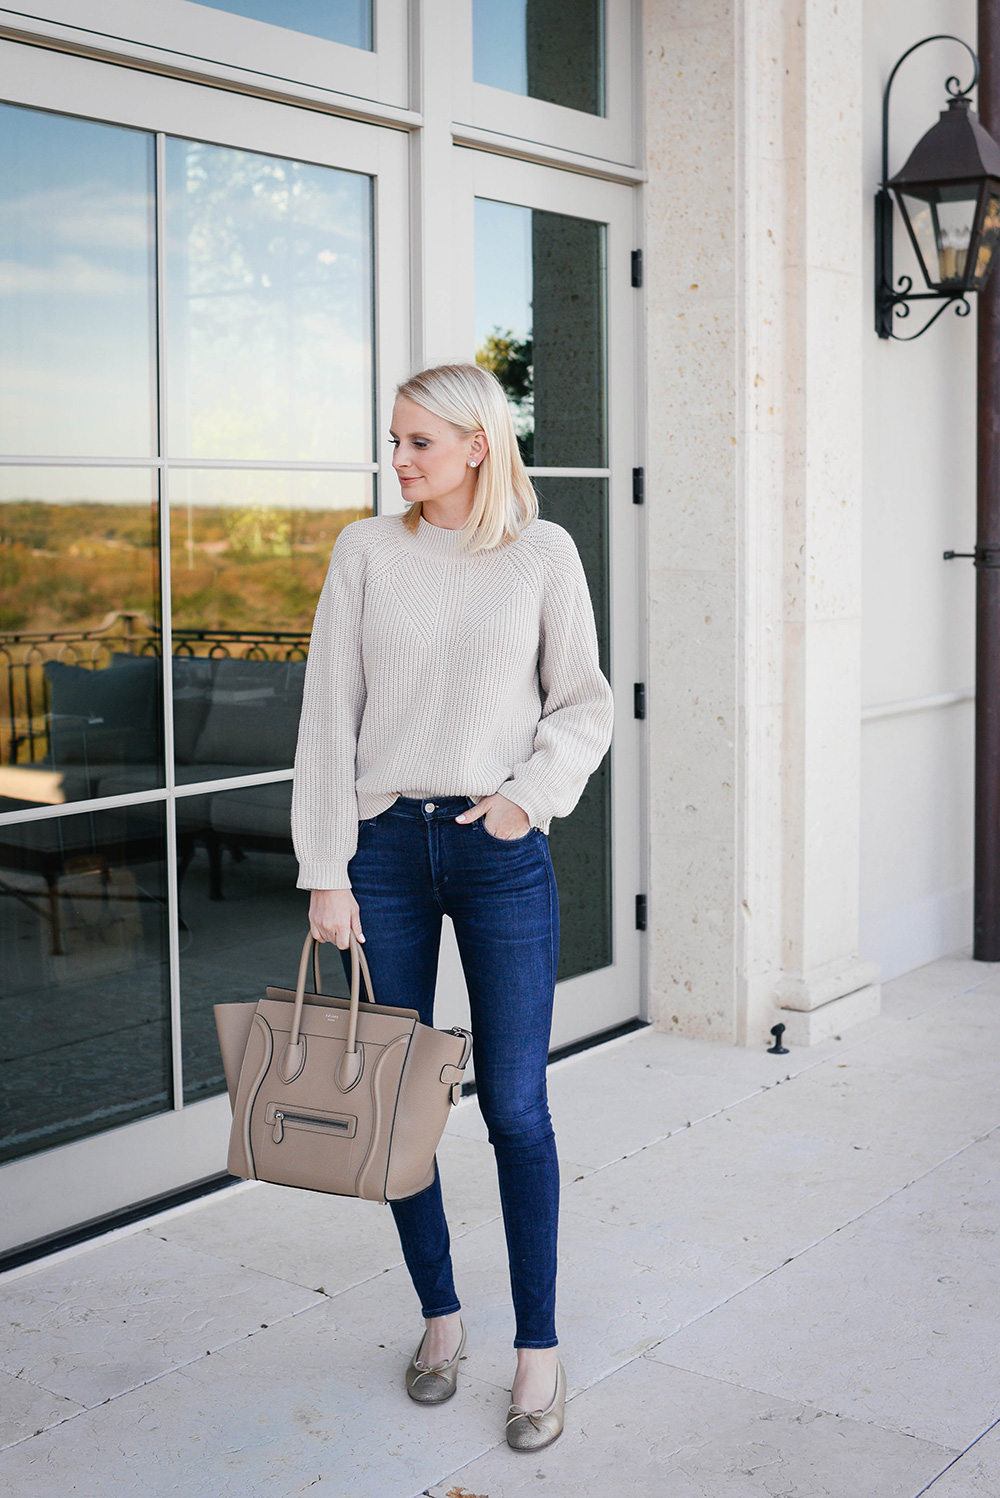 BP Shaker Stitch Sweater | The Style Scribe